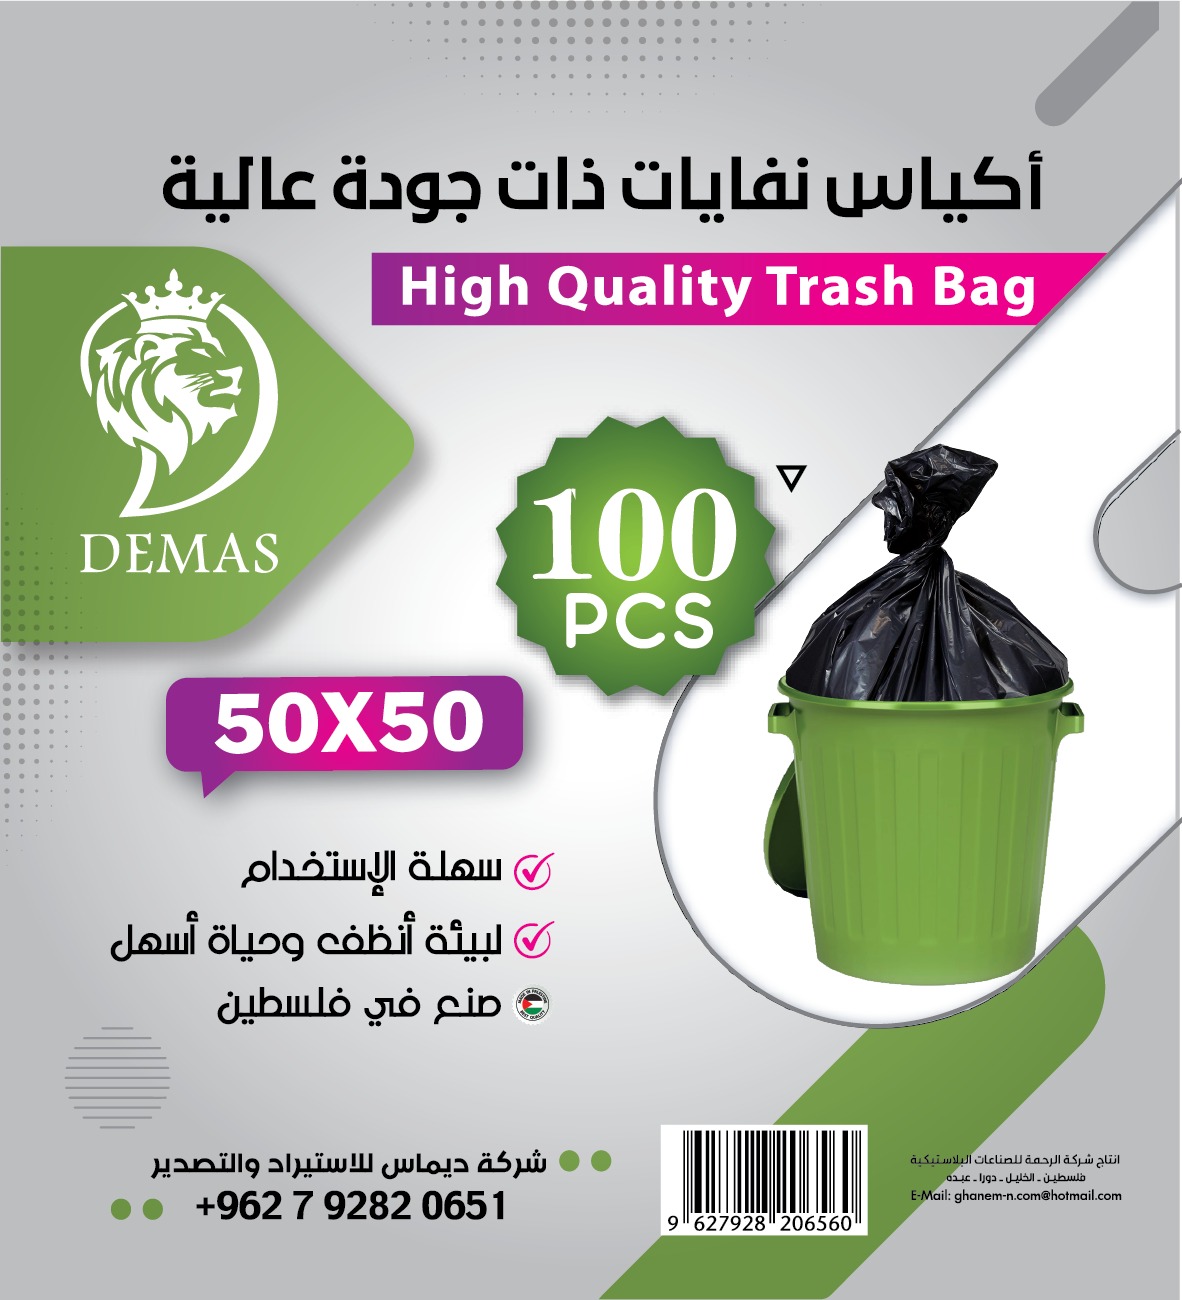 Trash bags 50 * 50 cm, rolls of 100 from DEMAS